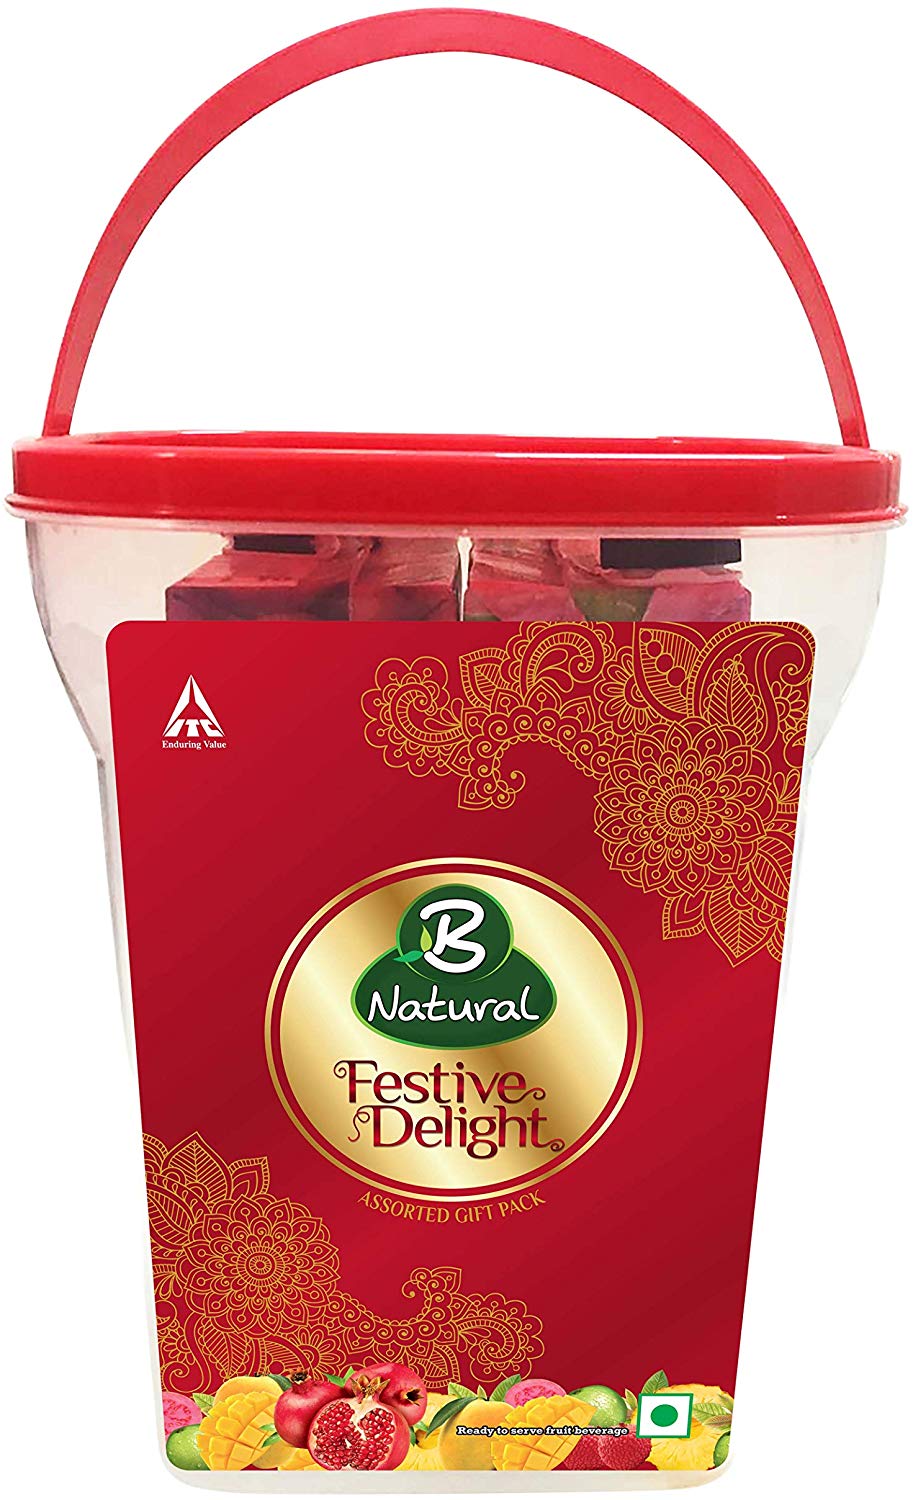 B Natural Festive Delight Festive Delight Utility Gift Pack with Plastic Container, 2 L